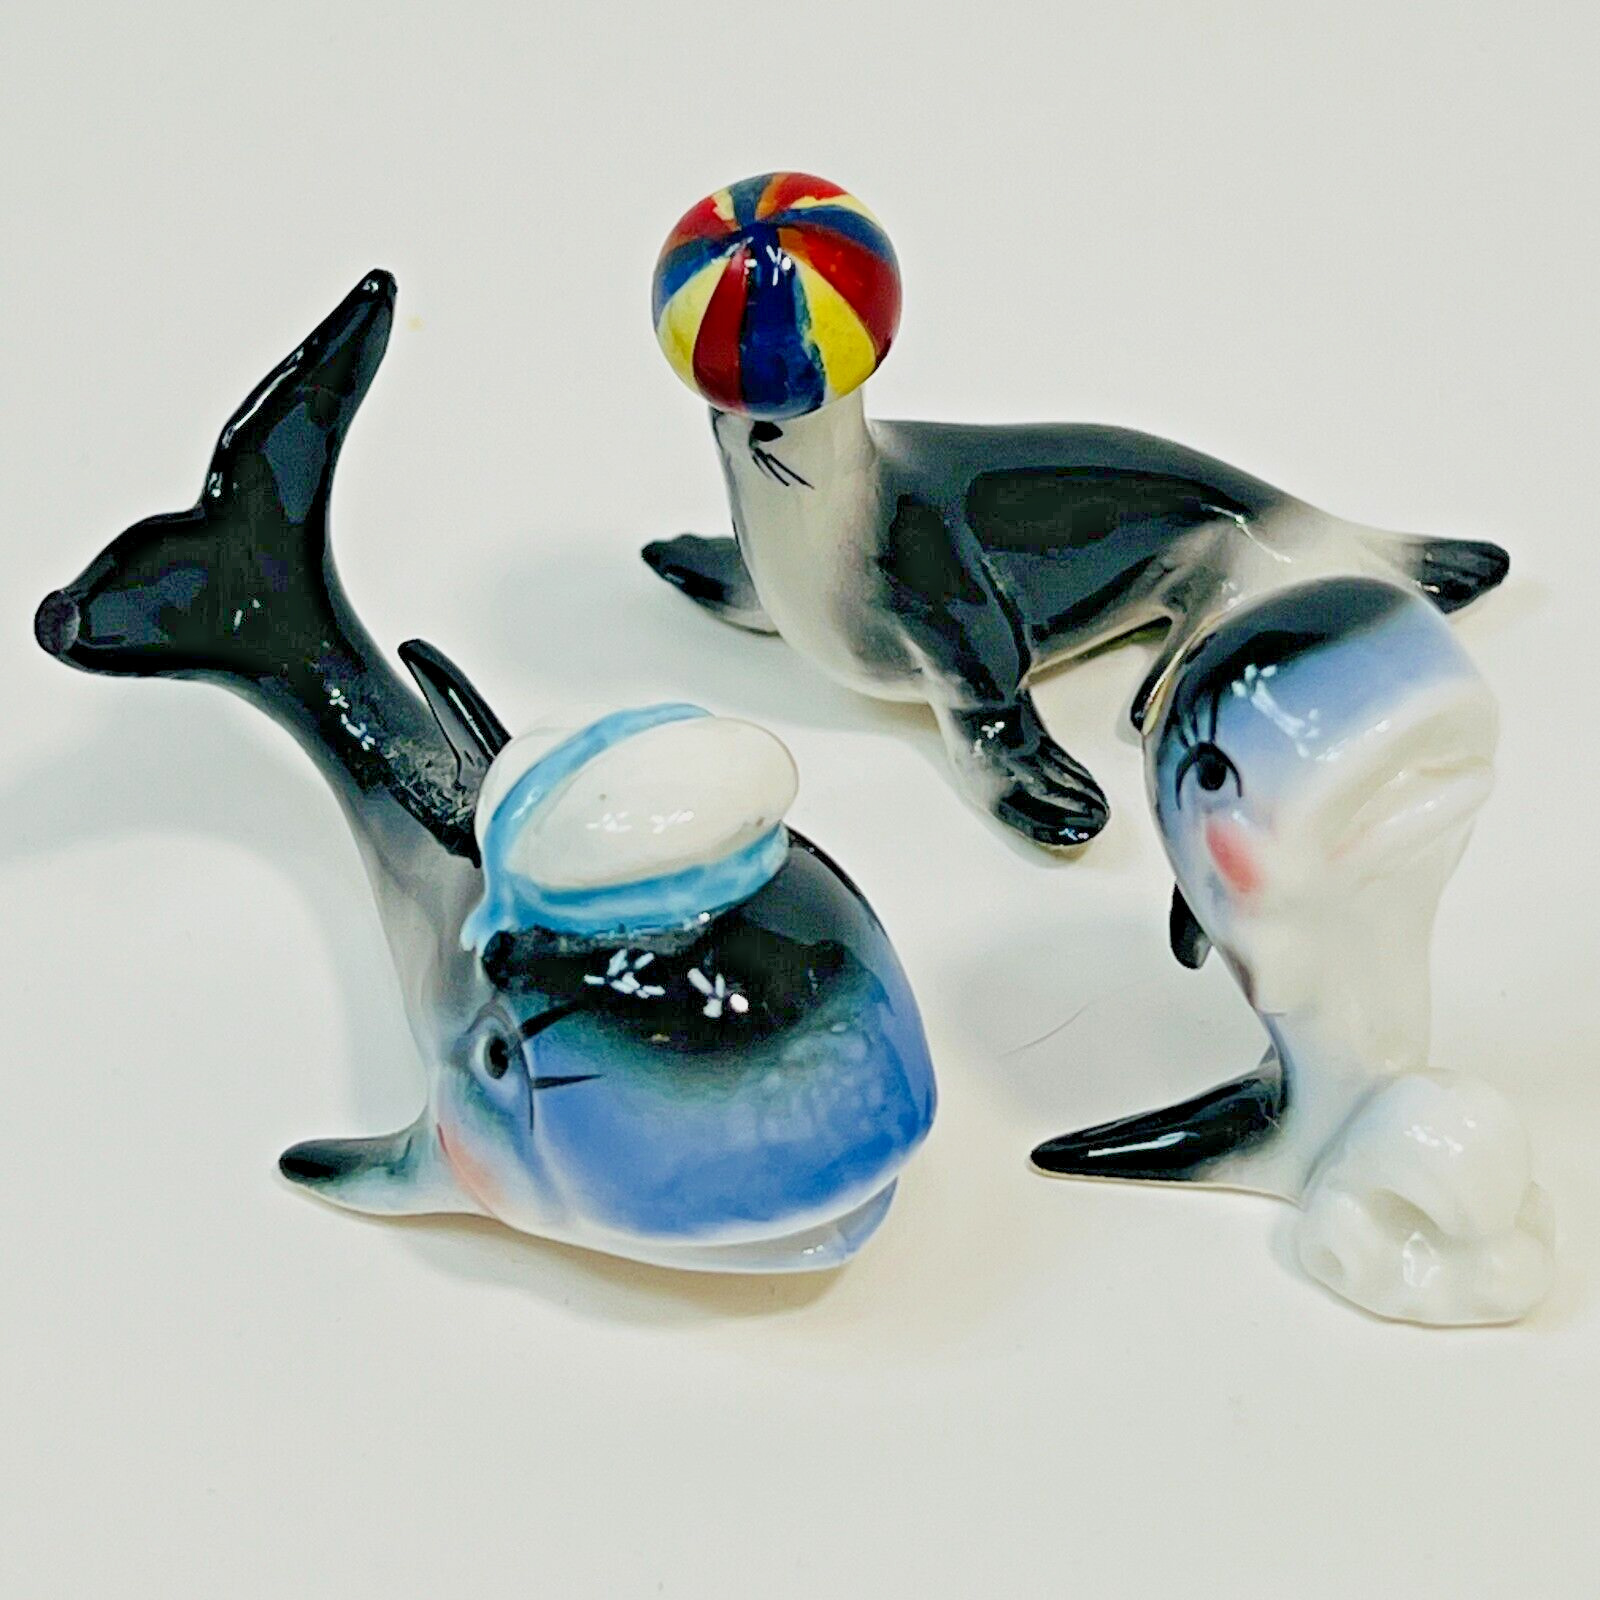 Kelvin’s Japan Vintage mini porcelain Whales with Sailor Hats Seal with a Ball